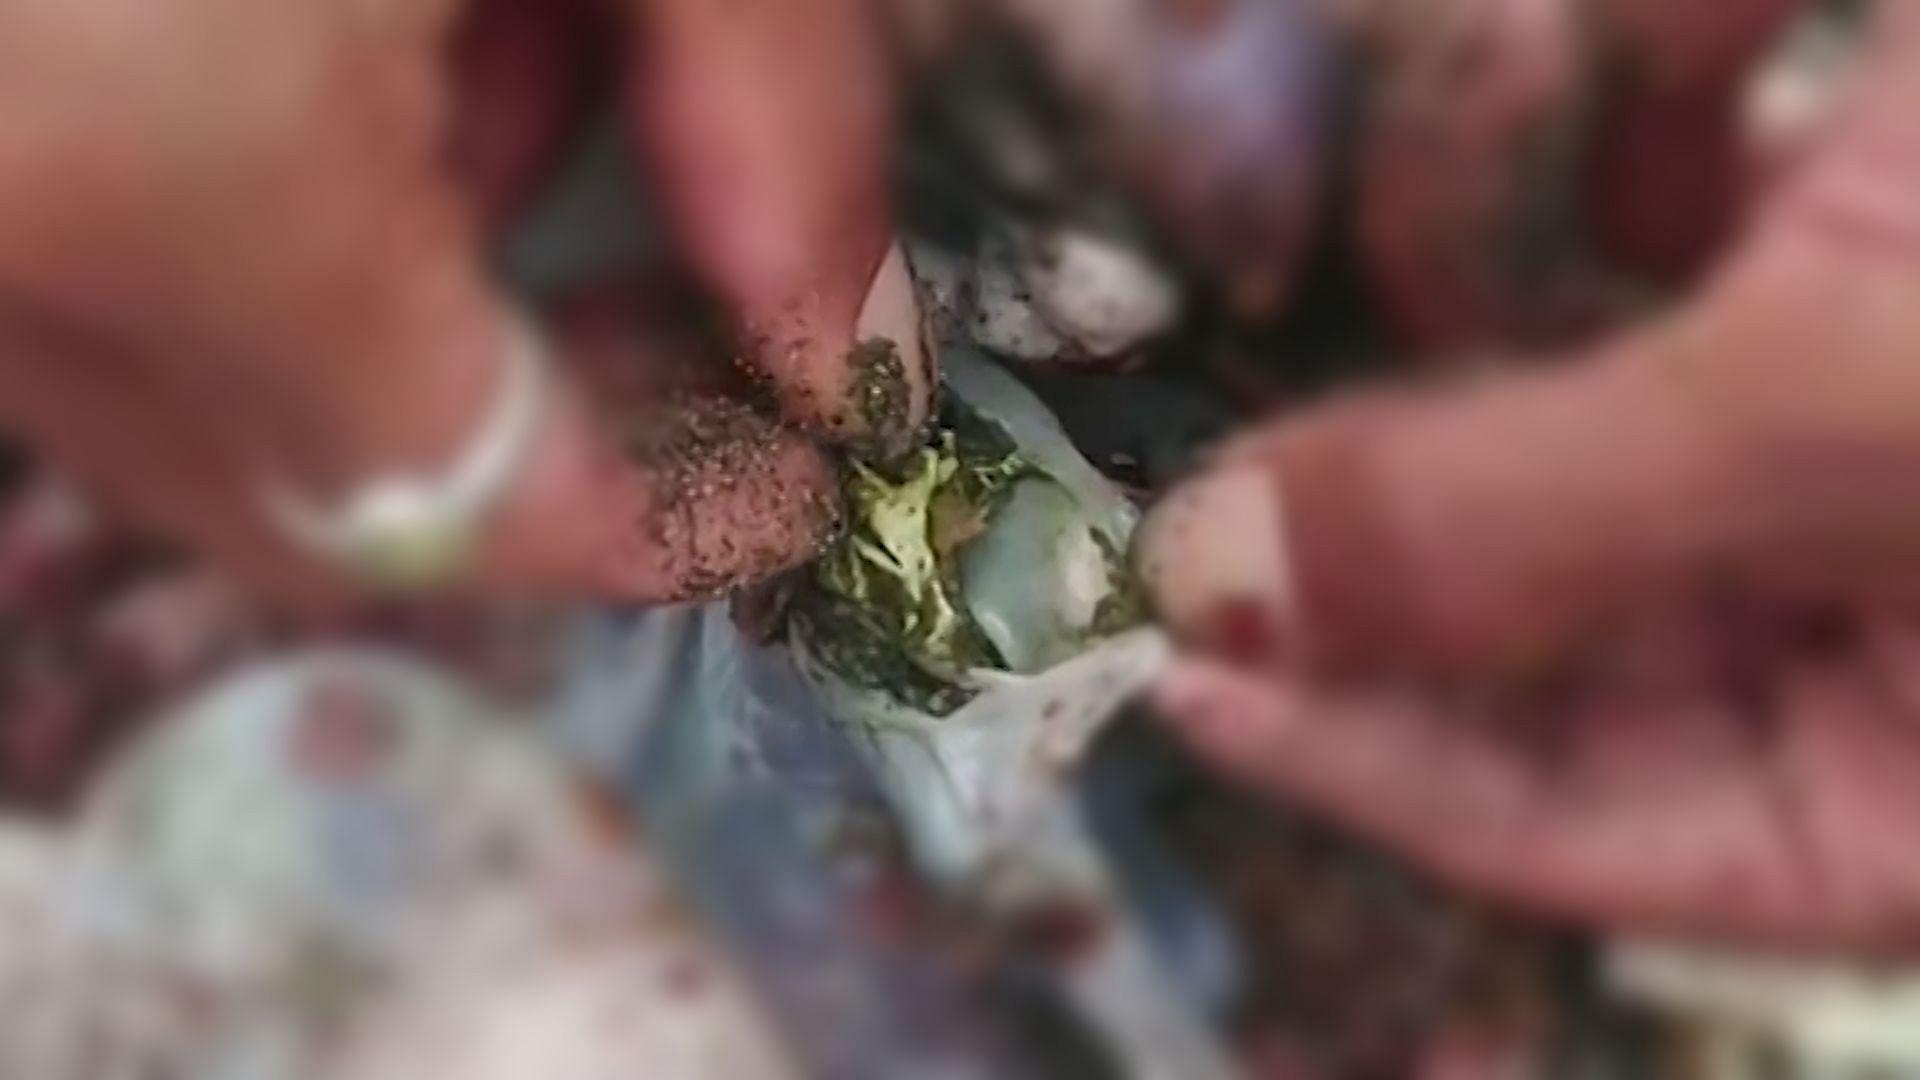 A video from Bali where a dead sea turtle was found washed up ashore with pieces of plastic in its intestines.